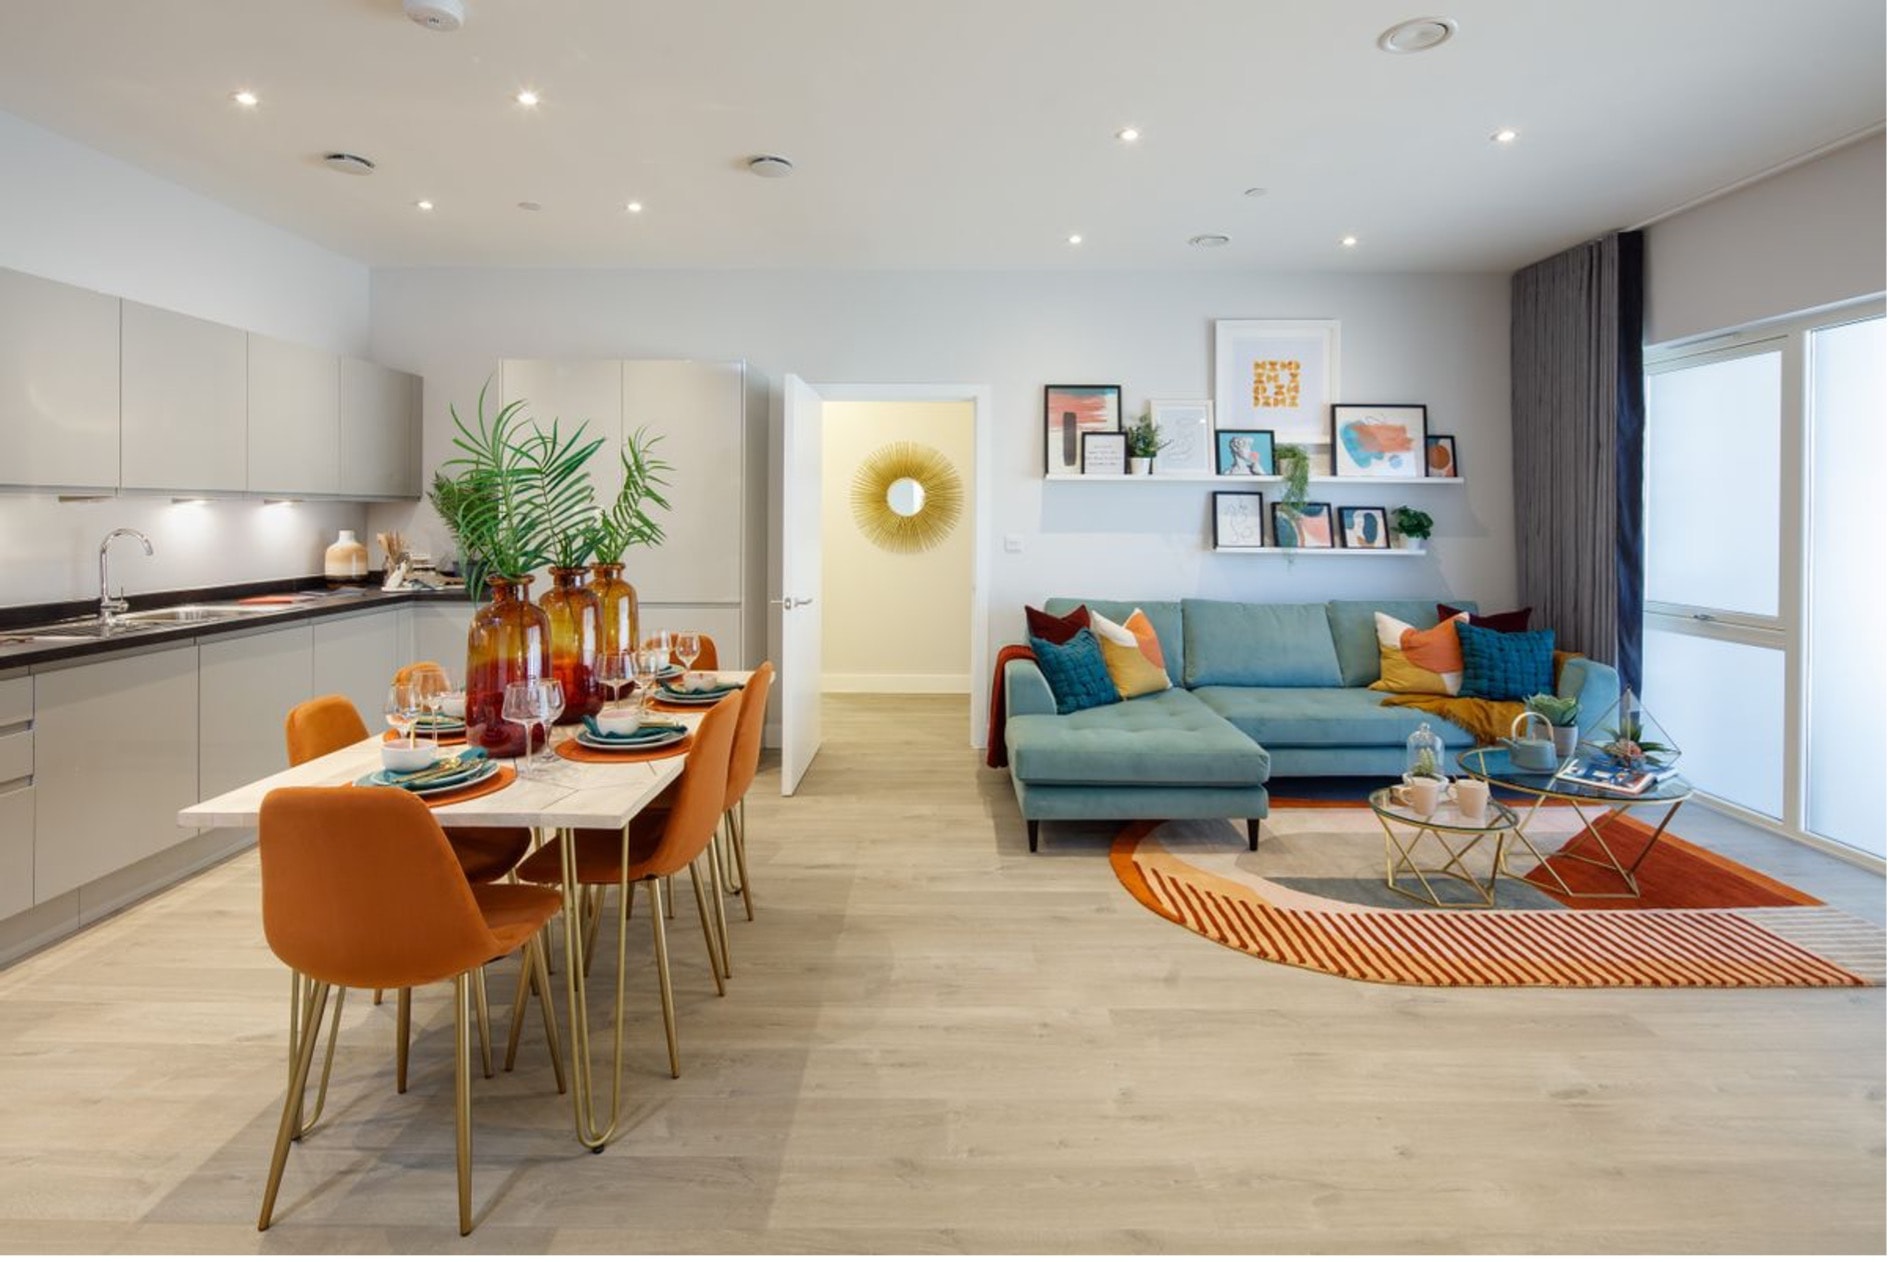 Shared Ownership in London; the dining room, living area and kitchen of Merrielands in London